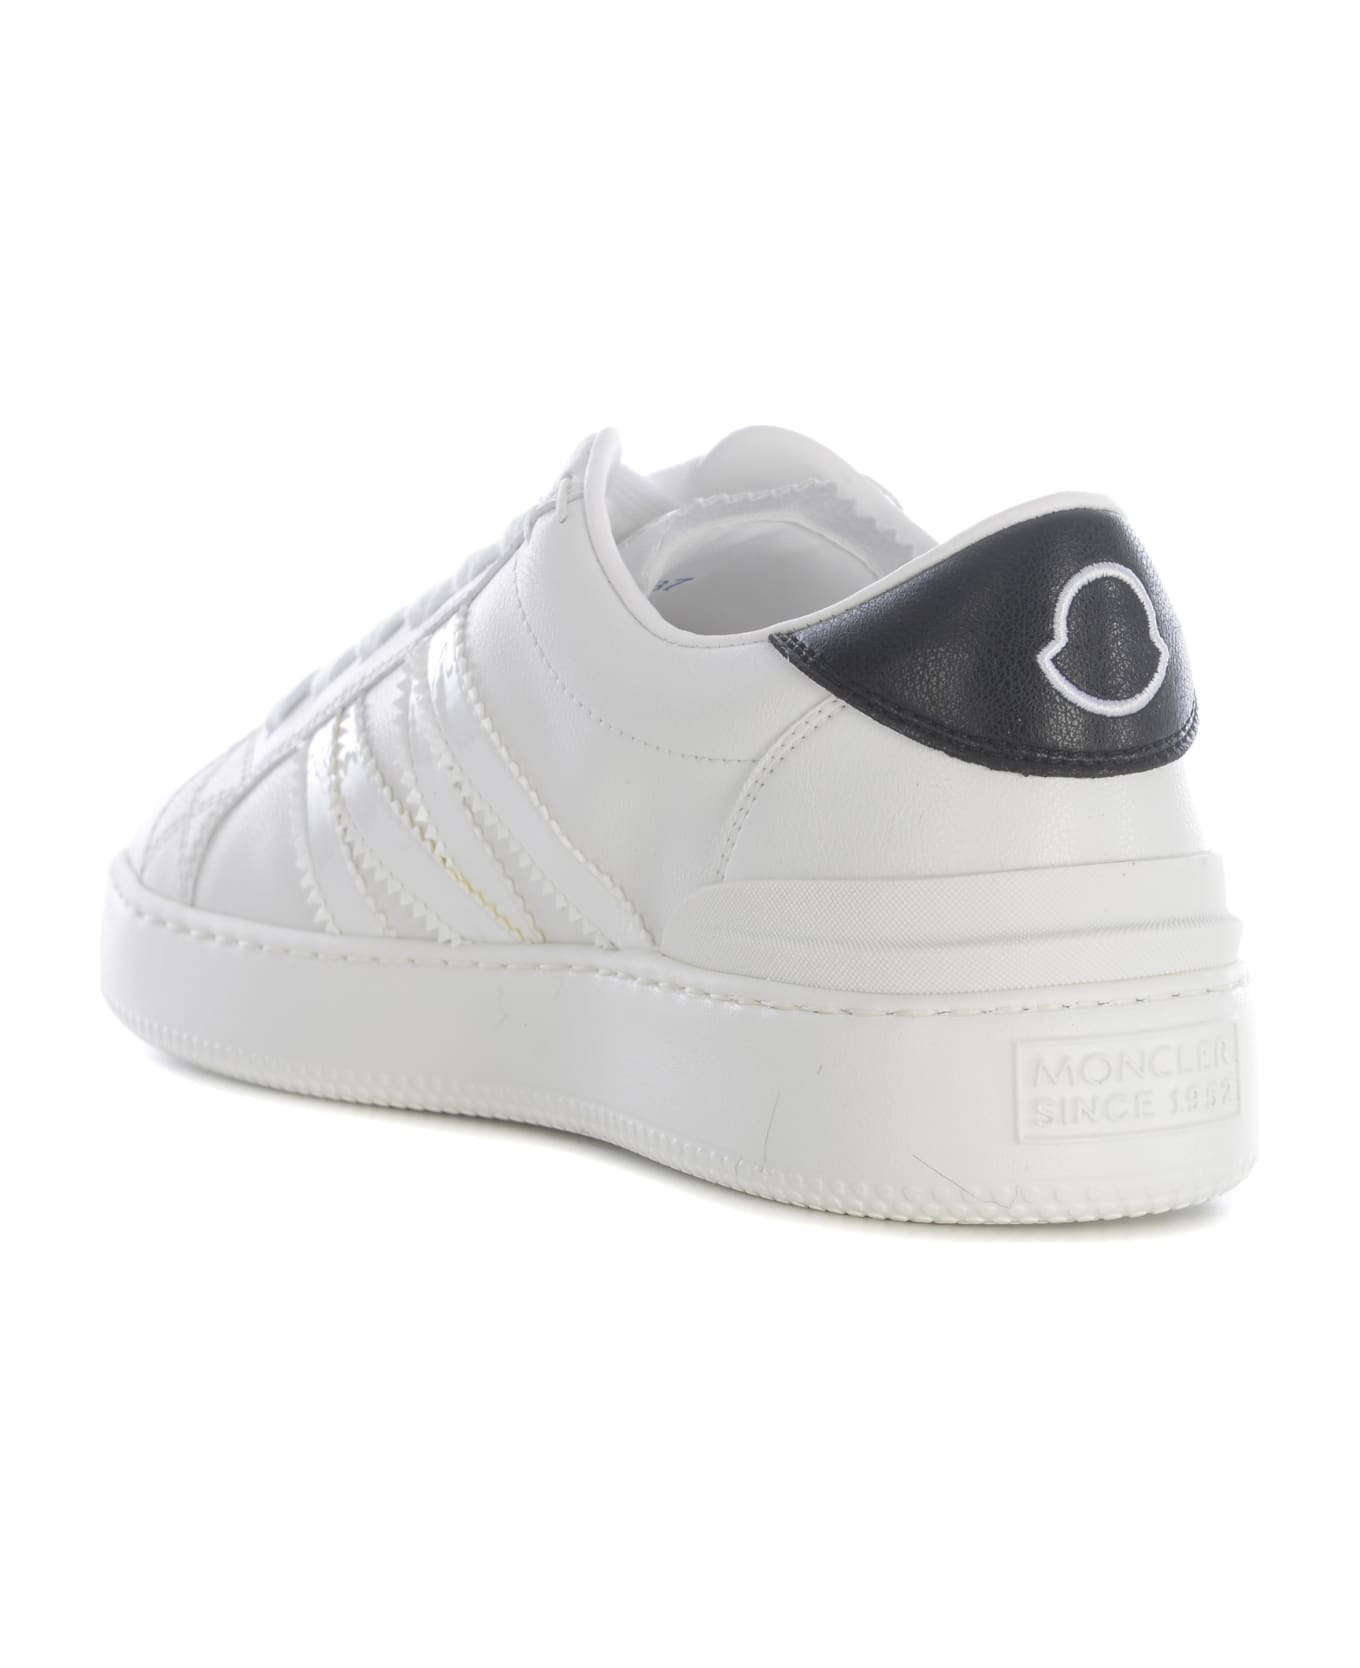 Moncler Sneakers - Bianco